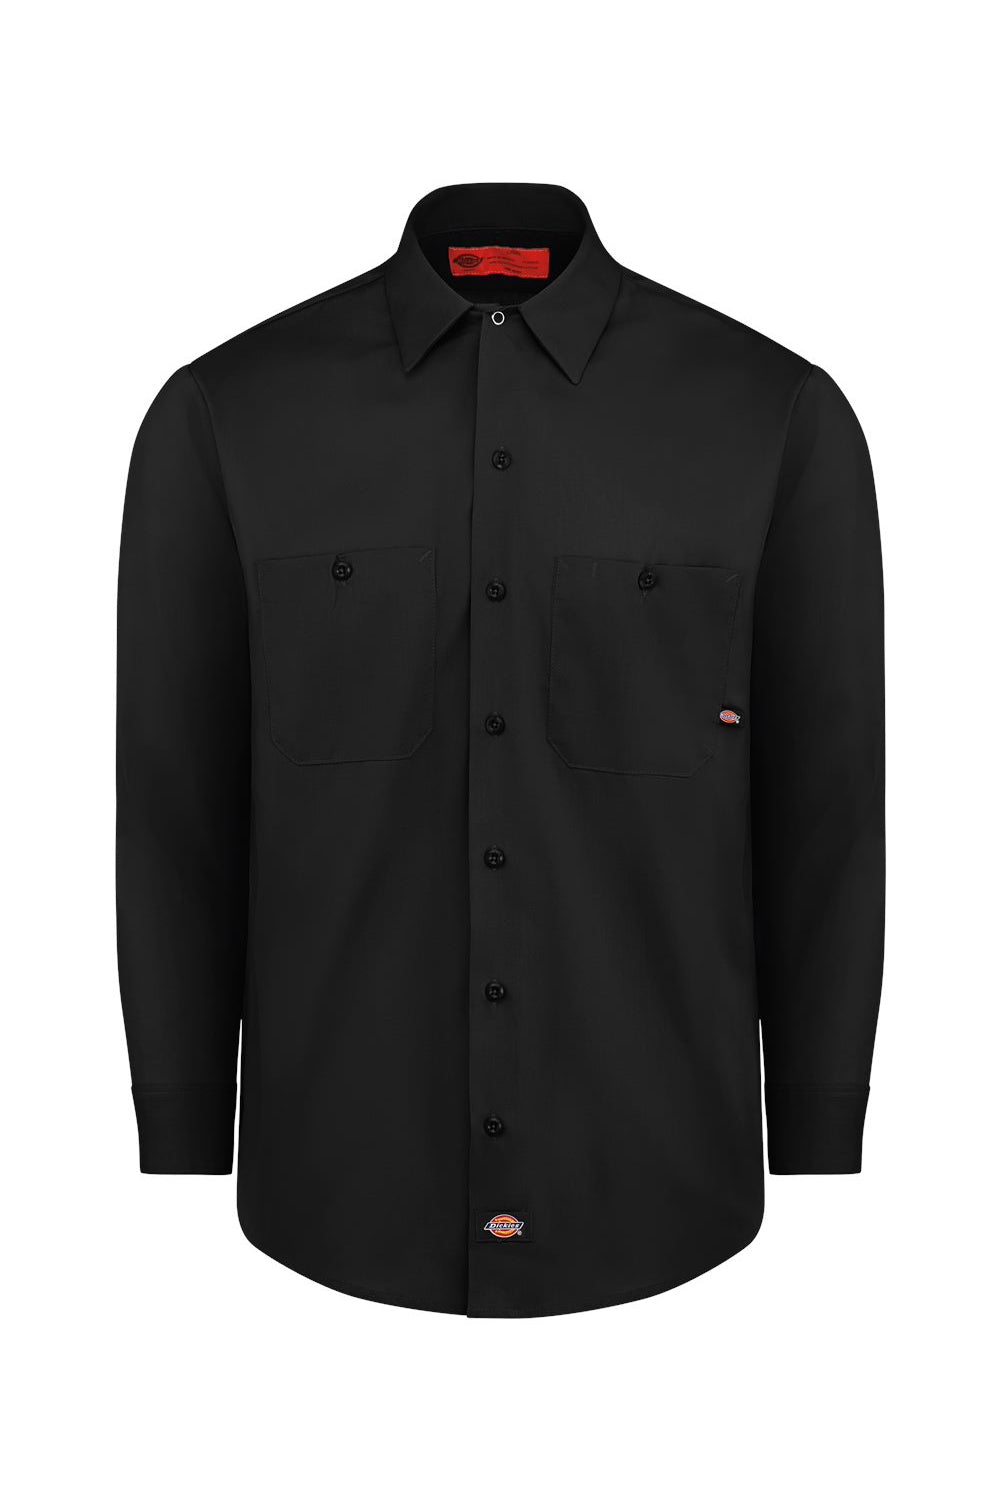 Dickies L535 Mens Industrial Wrinkle Resistant Long Sleeve Button Down Work Shirt w/ Double Pockets Black Flat Front